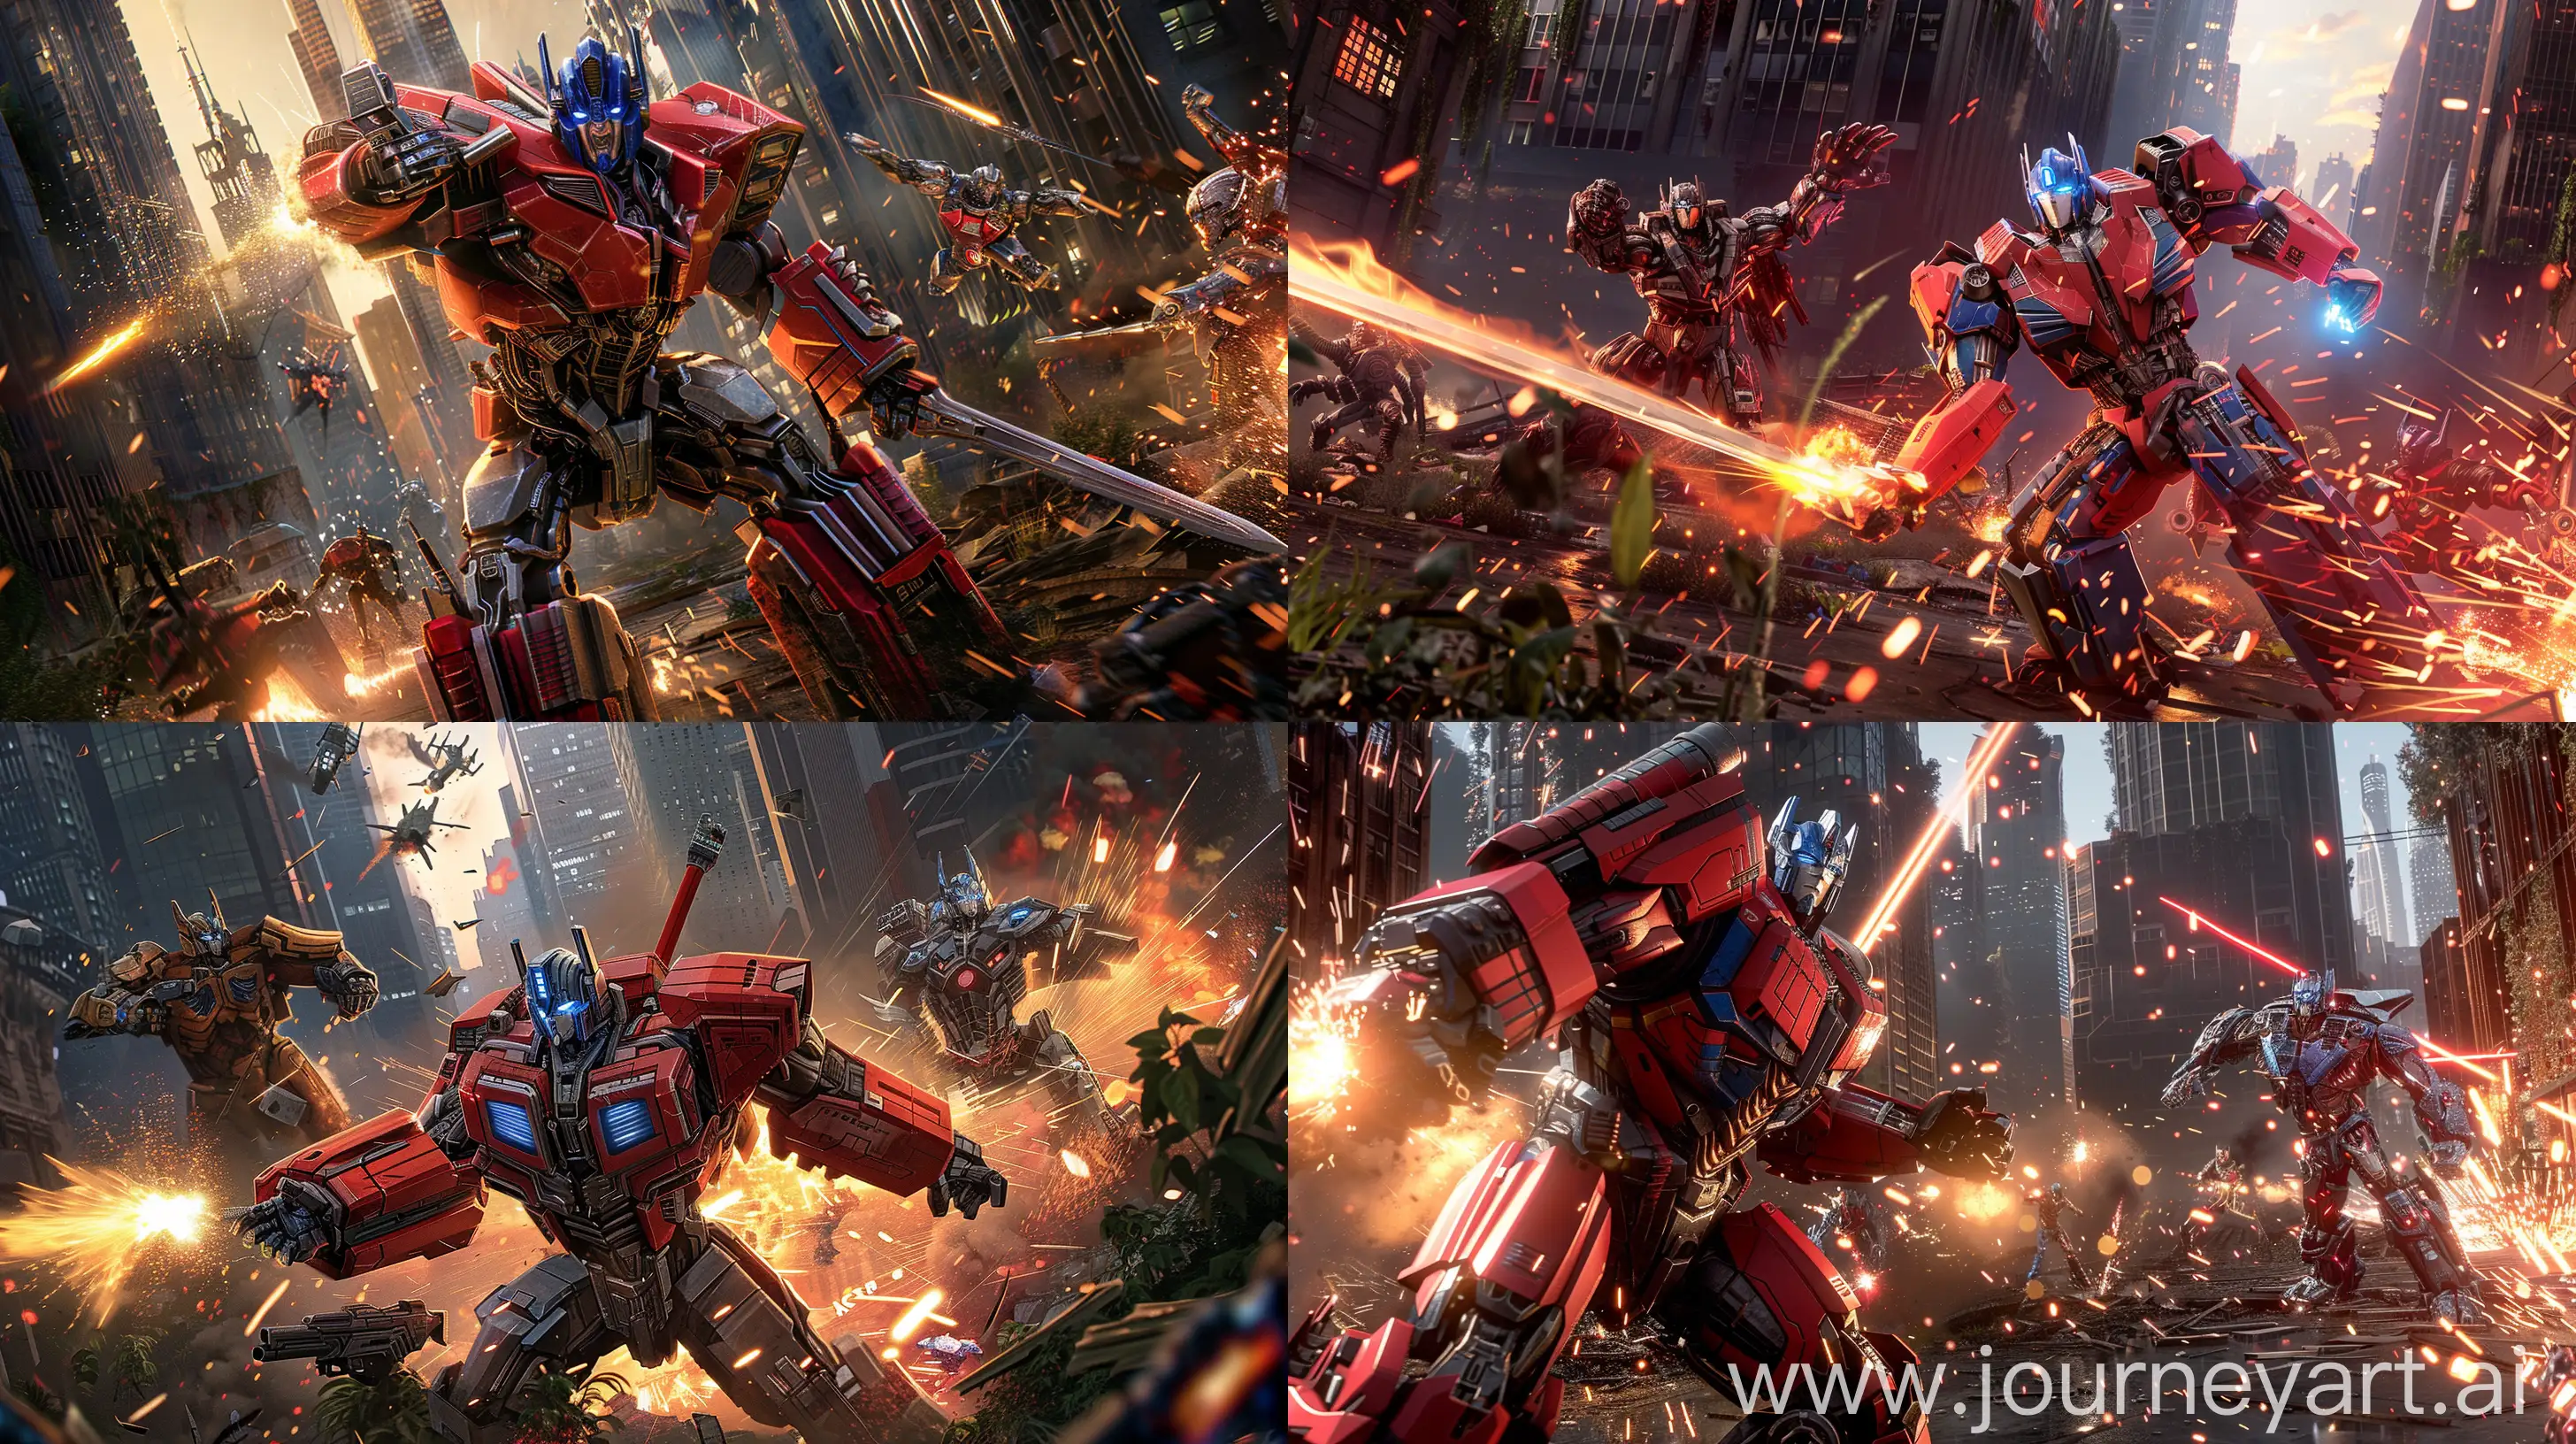 Epic-Battle-of-Autobots-and-Decepticons-in-Overgrown-Urban-Jungle